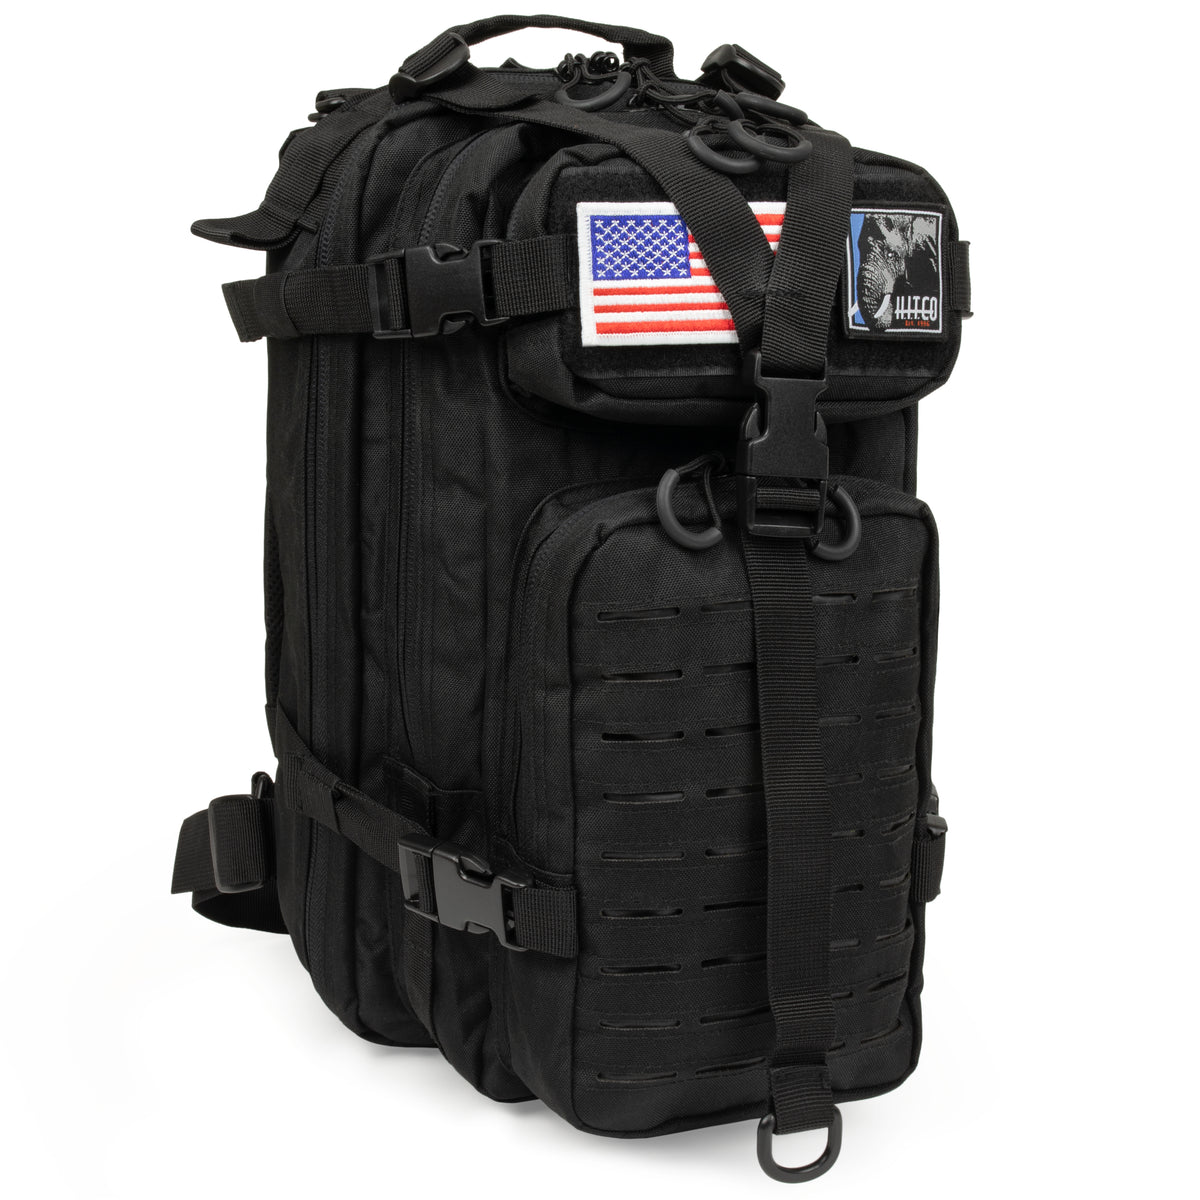 HITCo™ Assault Pack | MOLLE Backpack